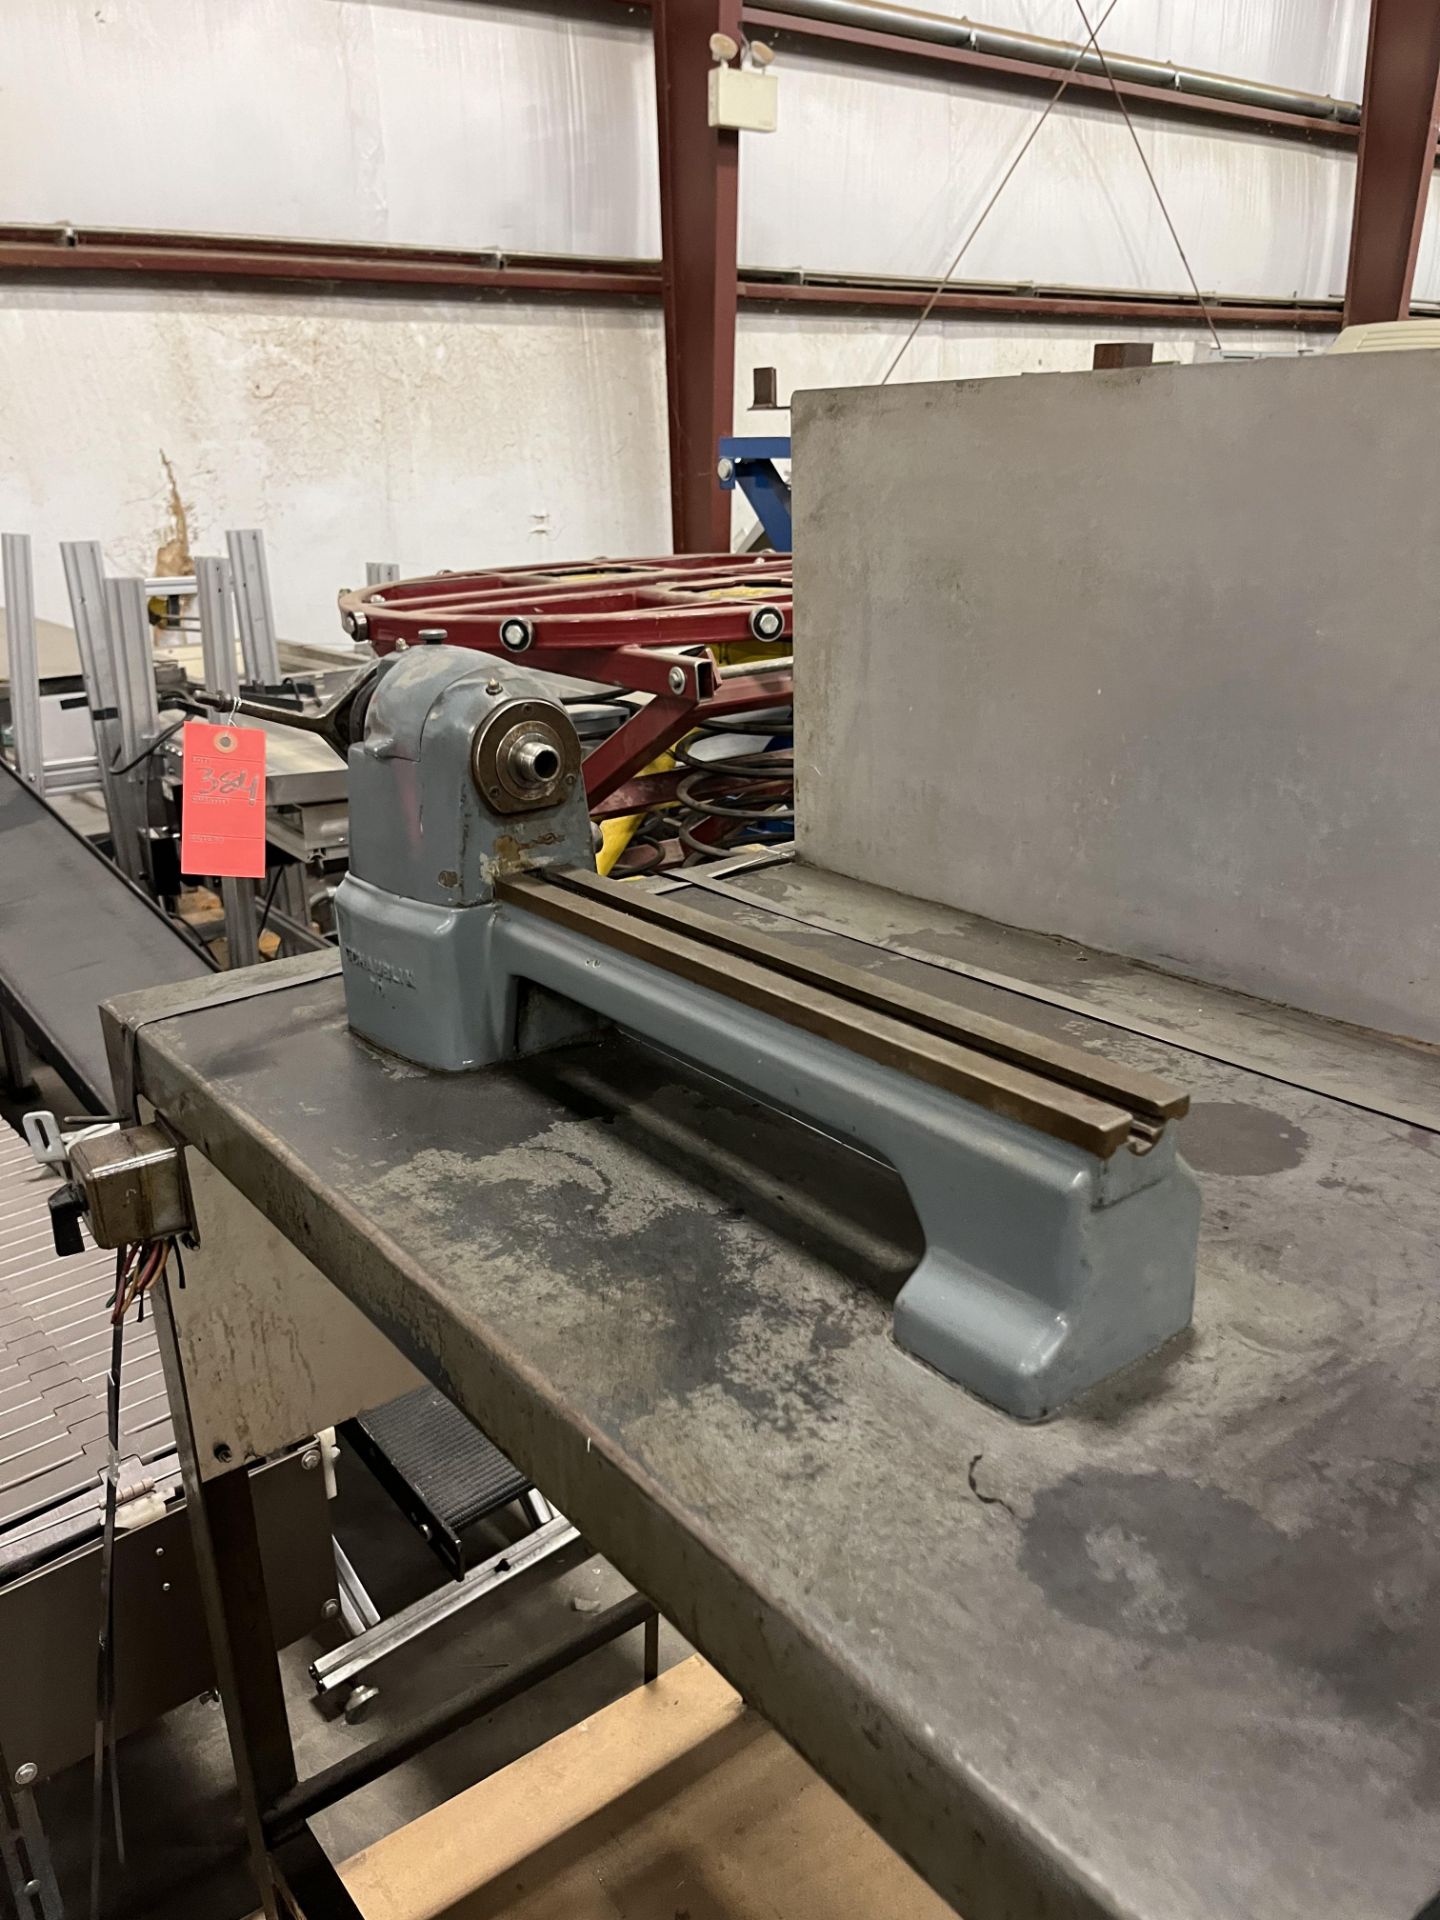 Schaublin 70 Lathe Mounted on Metal Work Table - Image 2 of 3